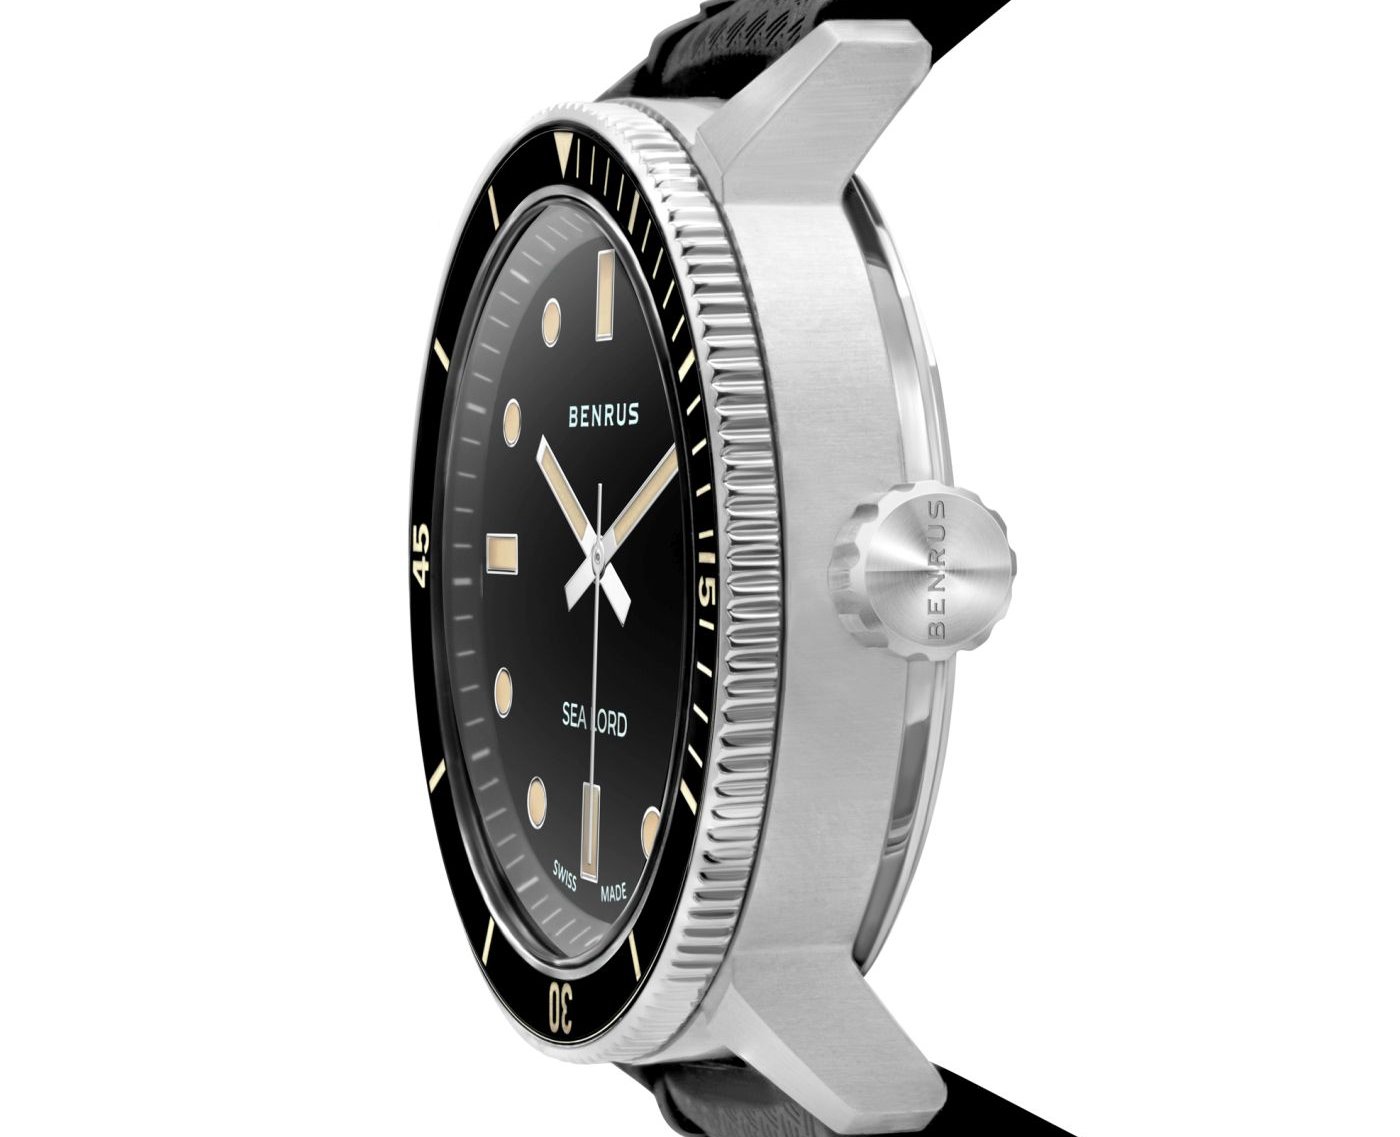 Benrus reintroduces historical Sea Lord Watch